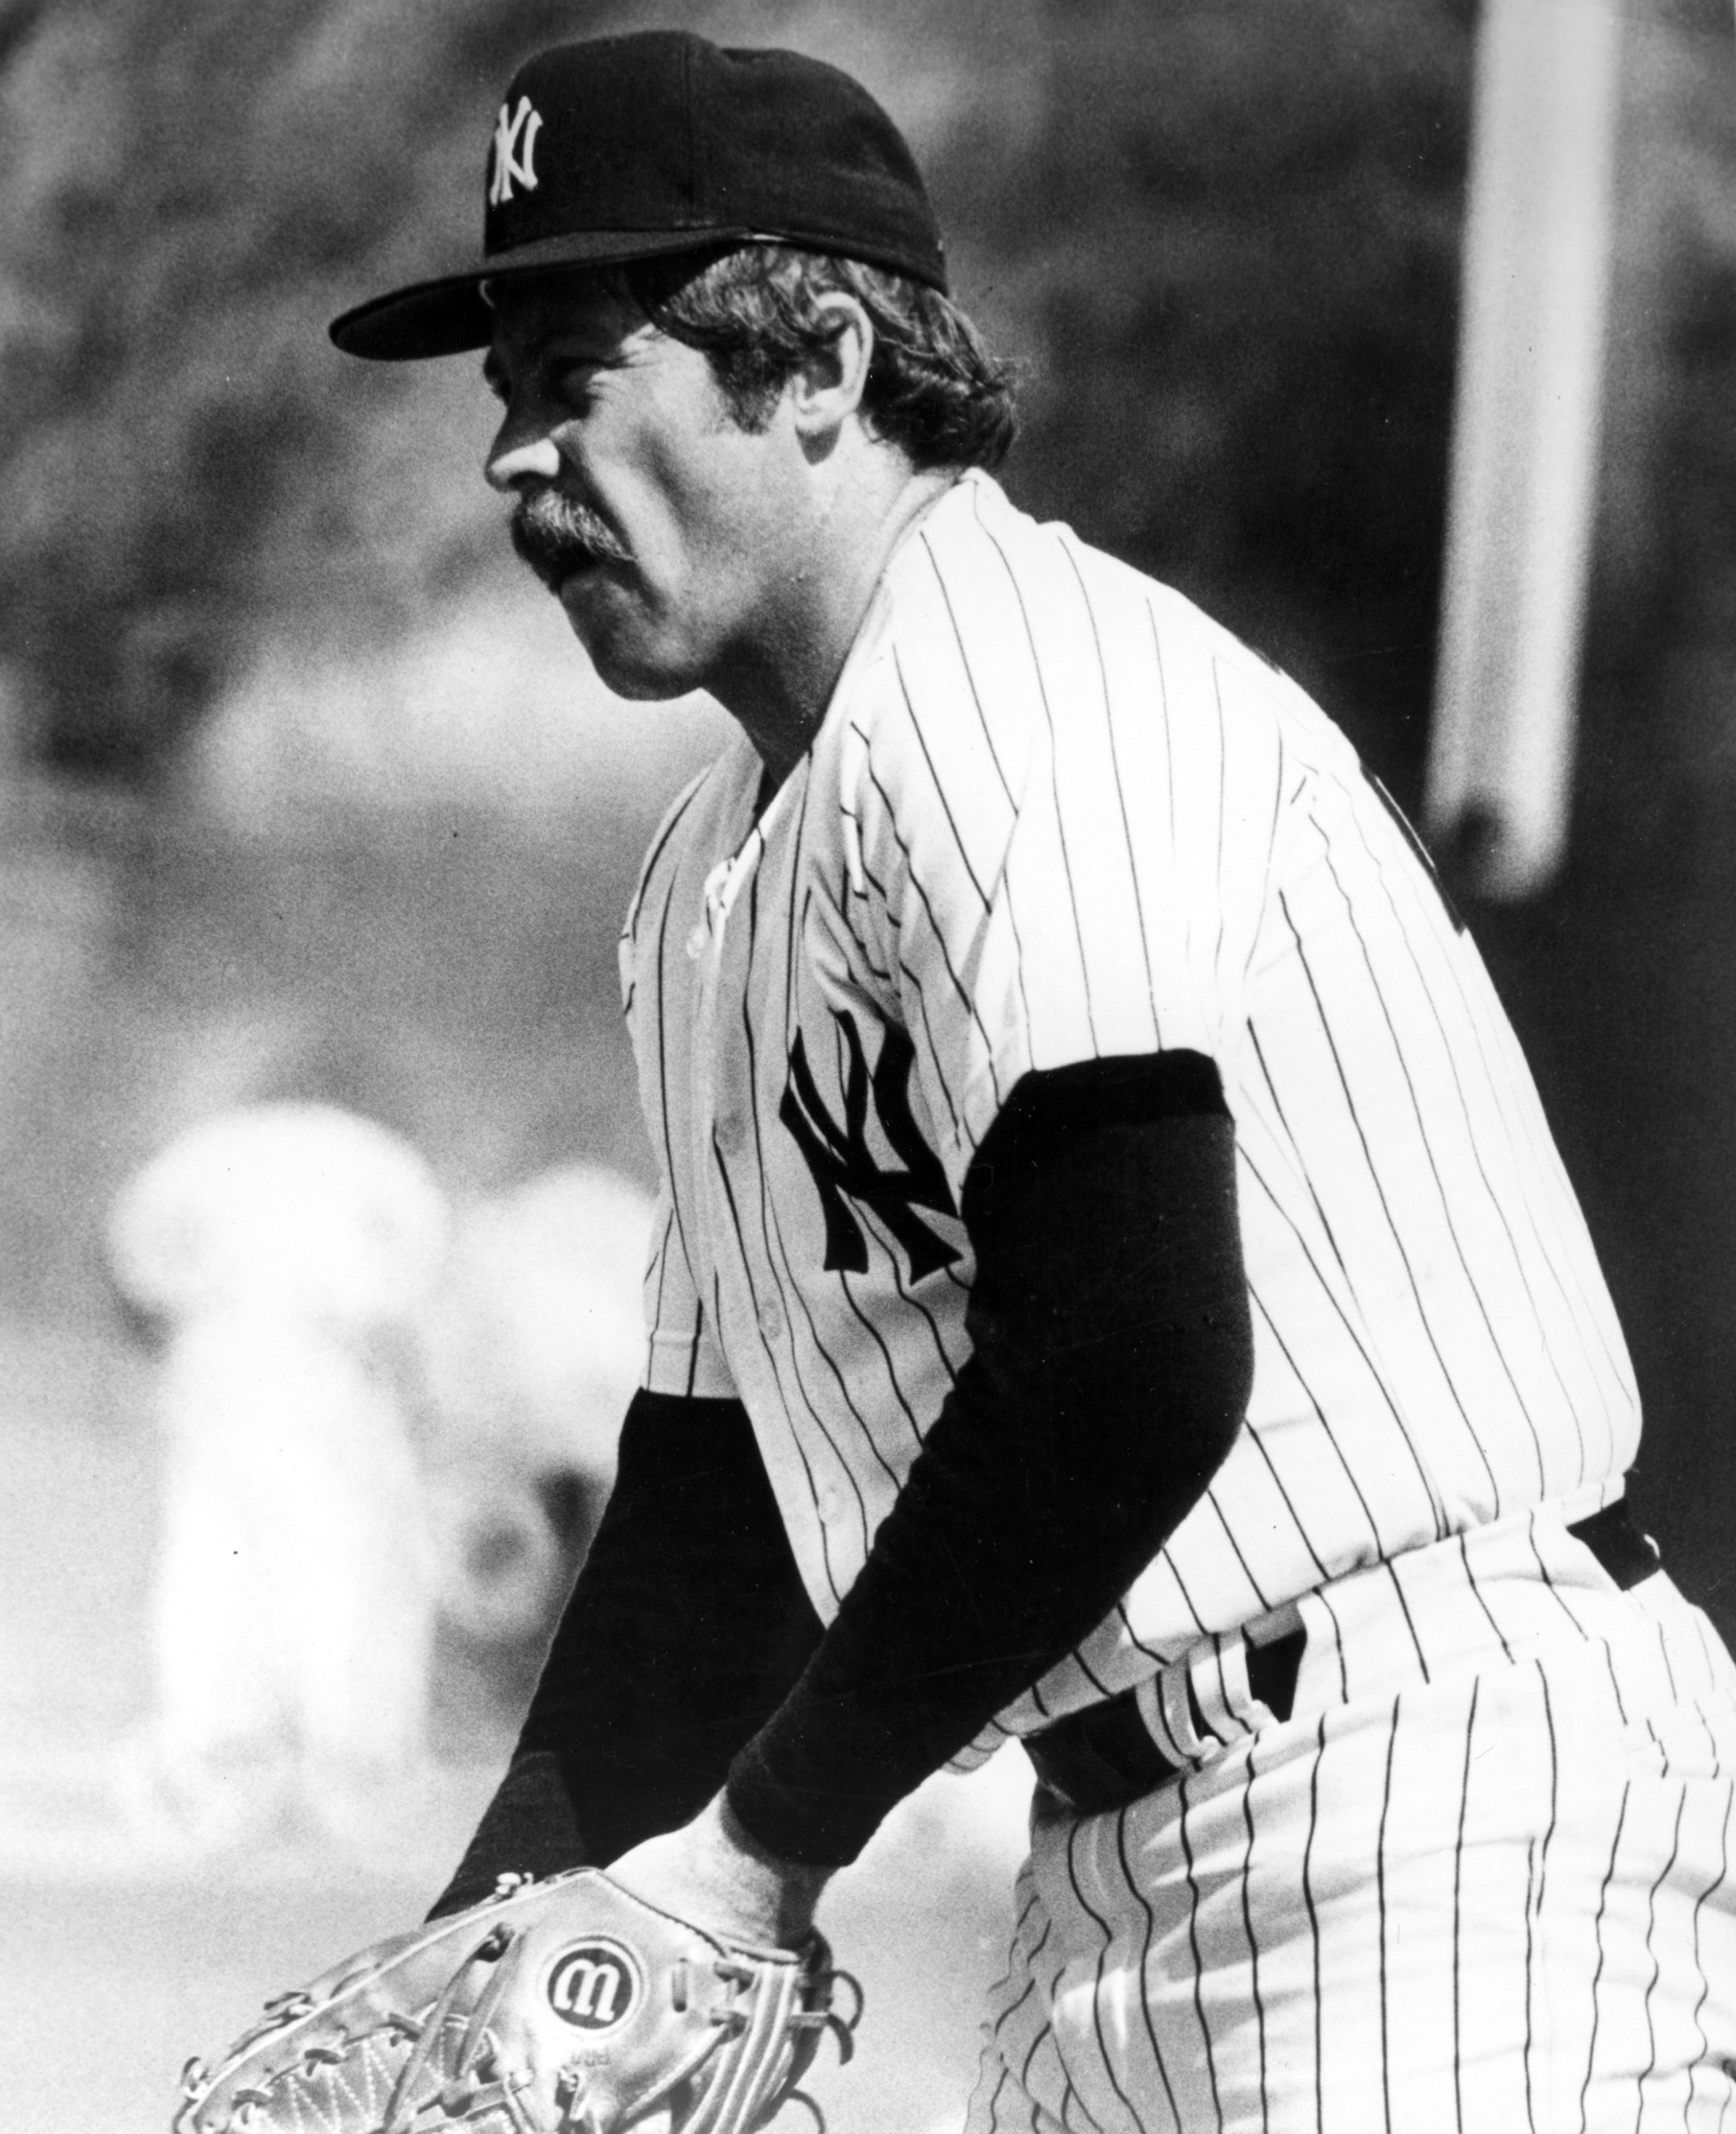 Catfish Hunter signs free agent contract with New York Yankees